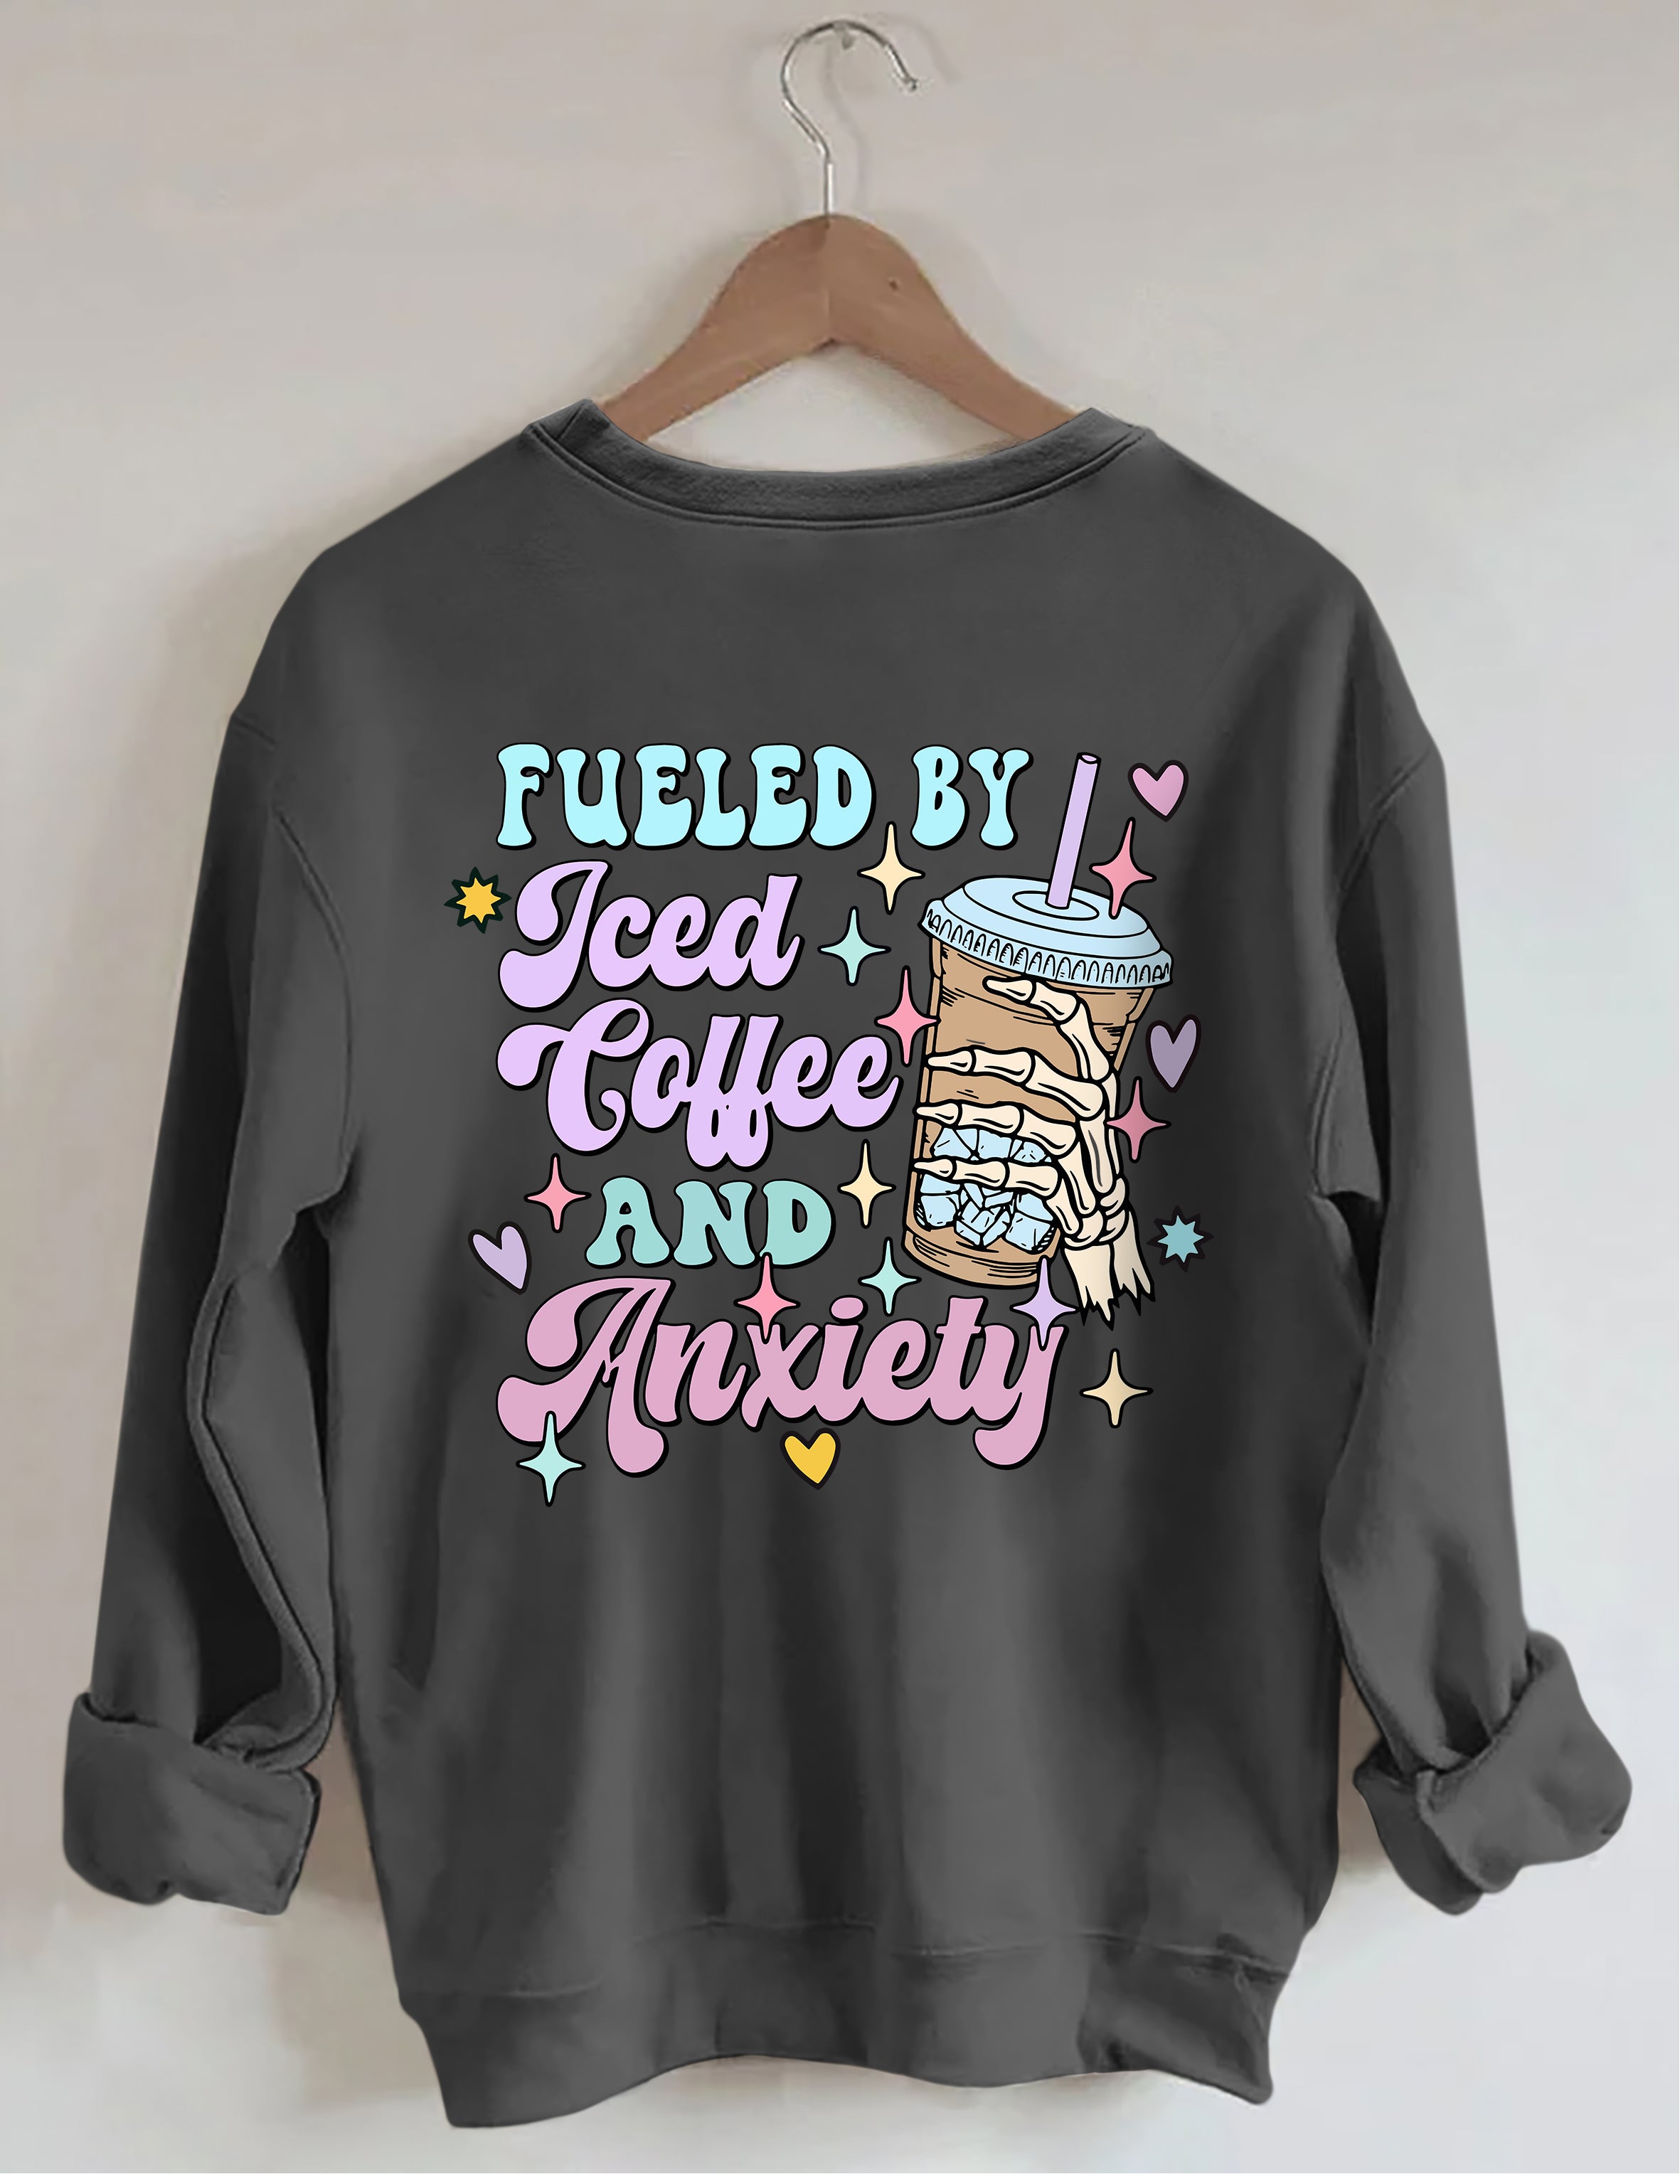 Fueled By ?ced Coffee And Anxiety Sweatshirt